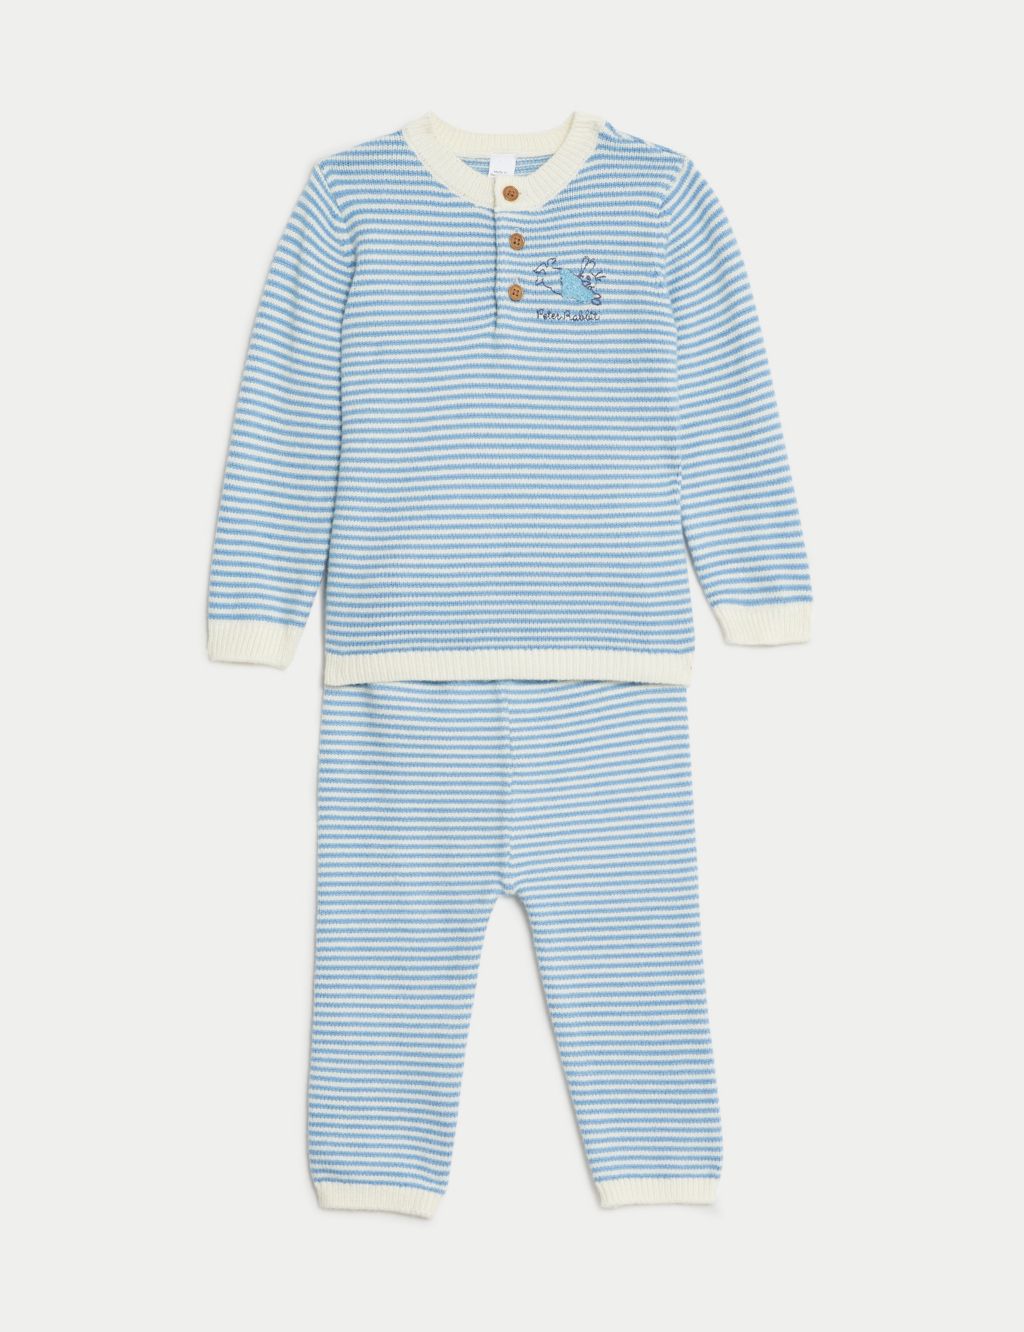 2pc Peter Rabbit™ Knitted Outfit (0-3 Yrs) image 1